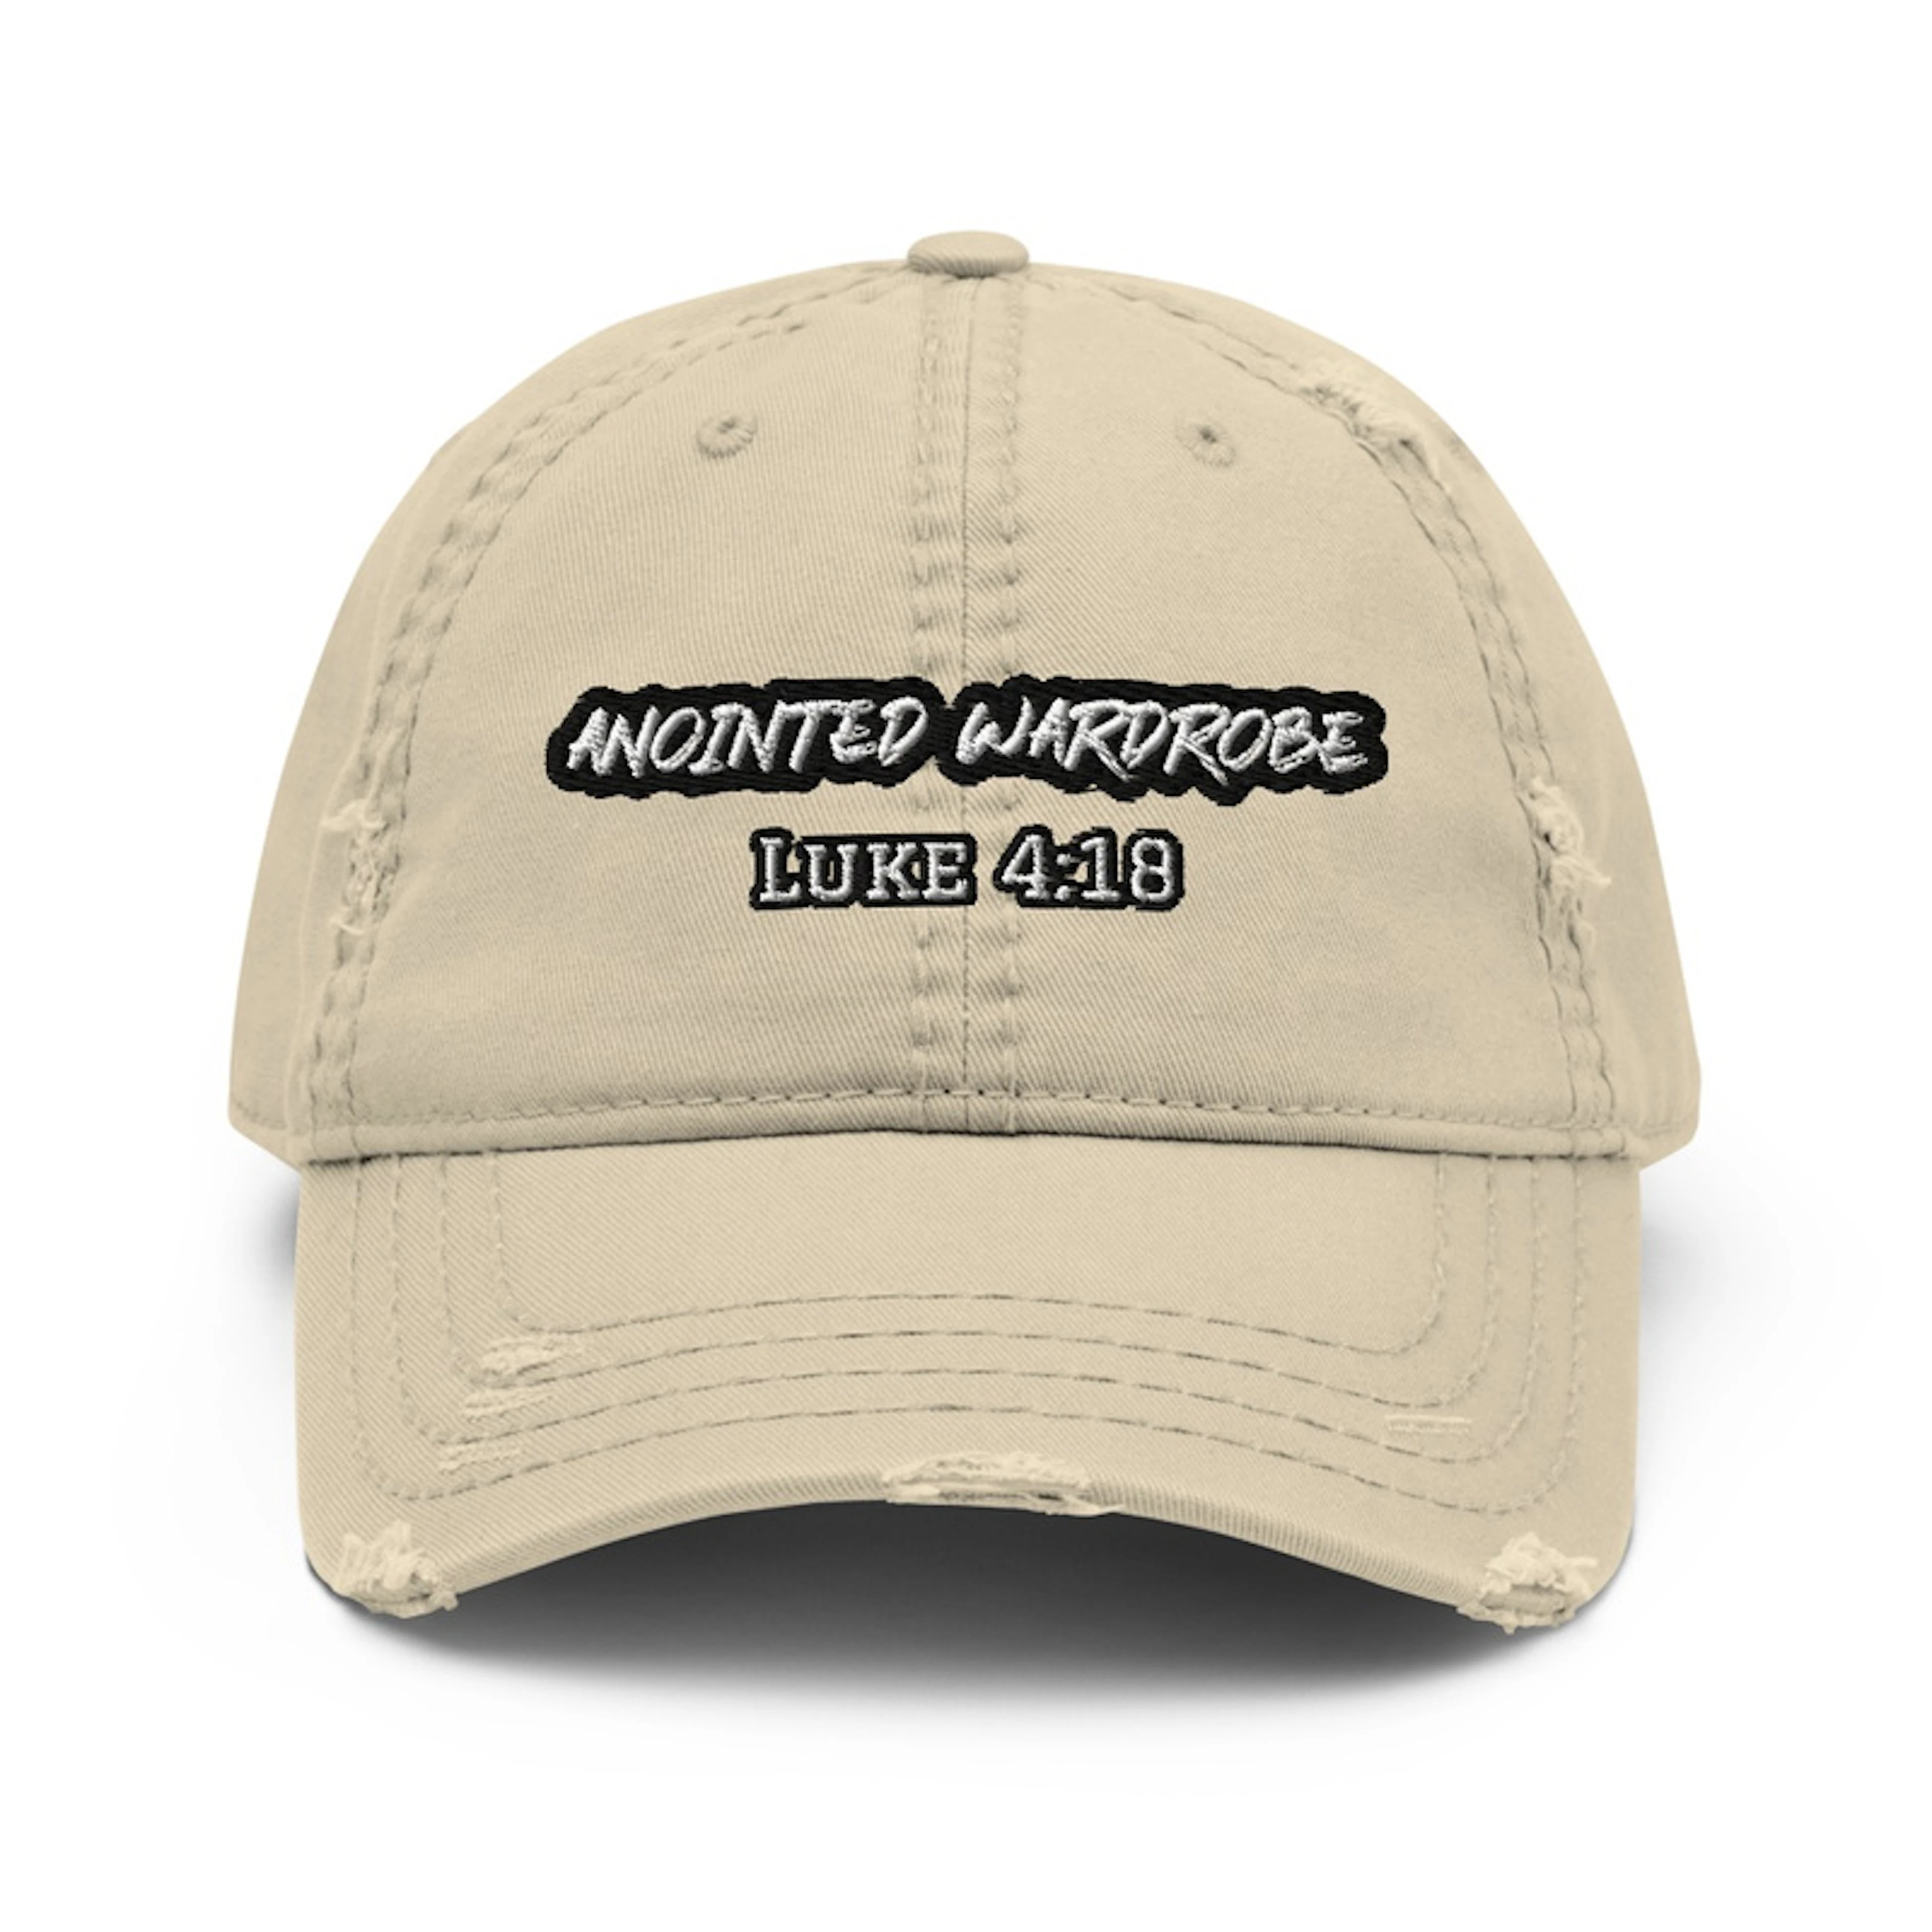 Anointed Wardrobe Distressed Hat